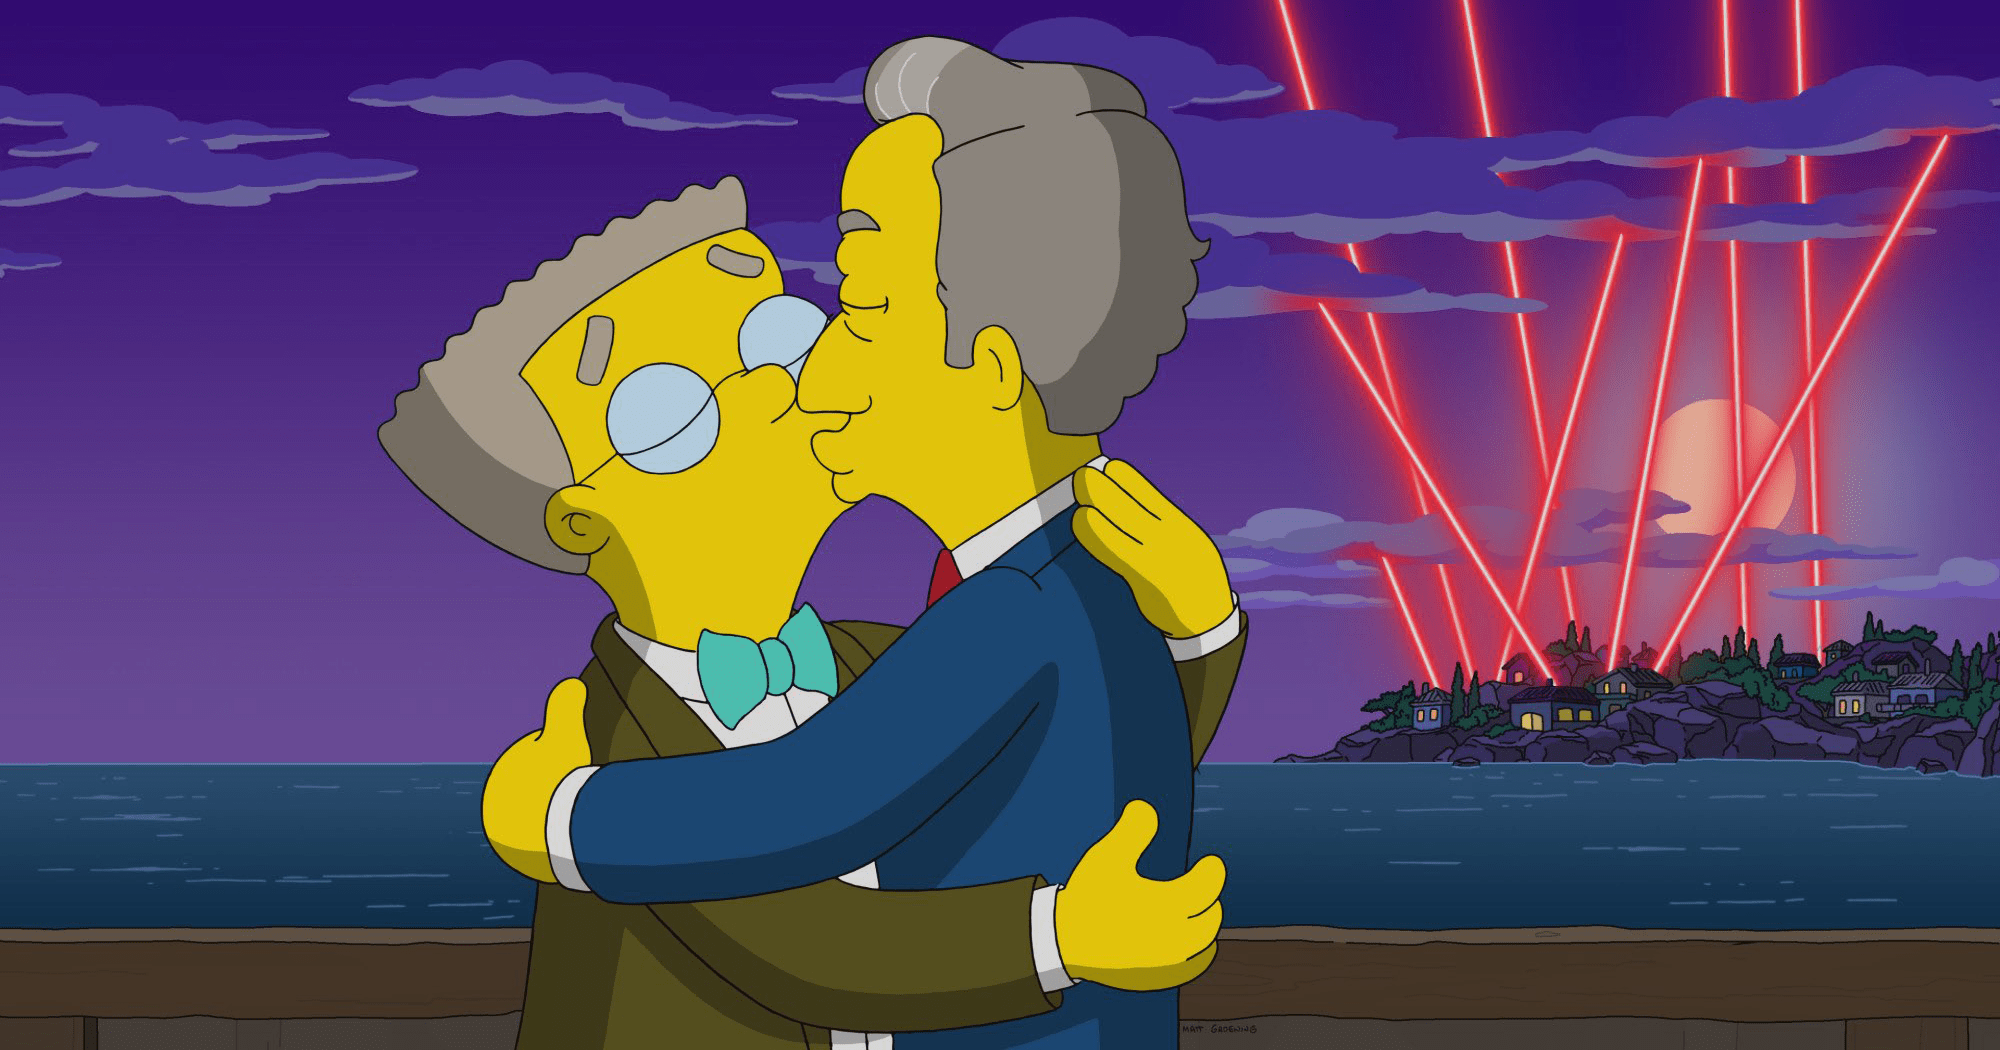 The Simpsons to air historic LGBTQ+ storyline featuring gay character Smithers • GCN